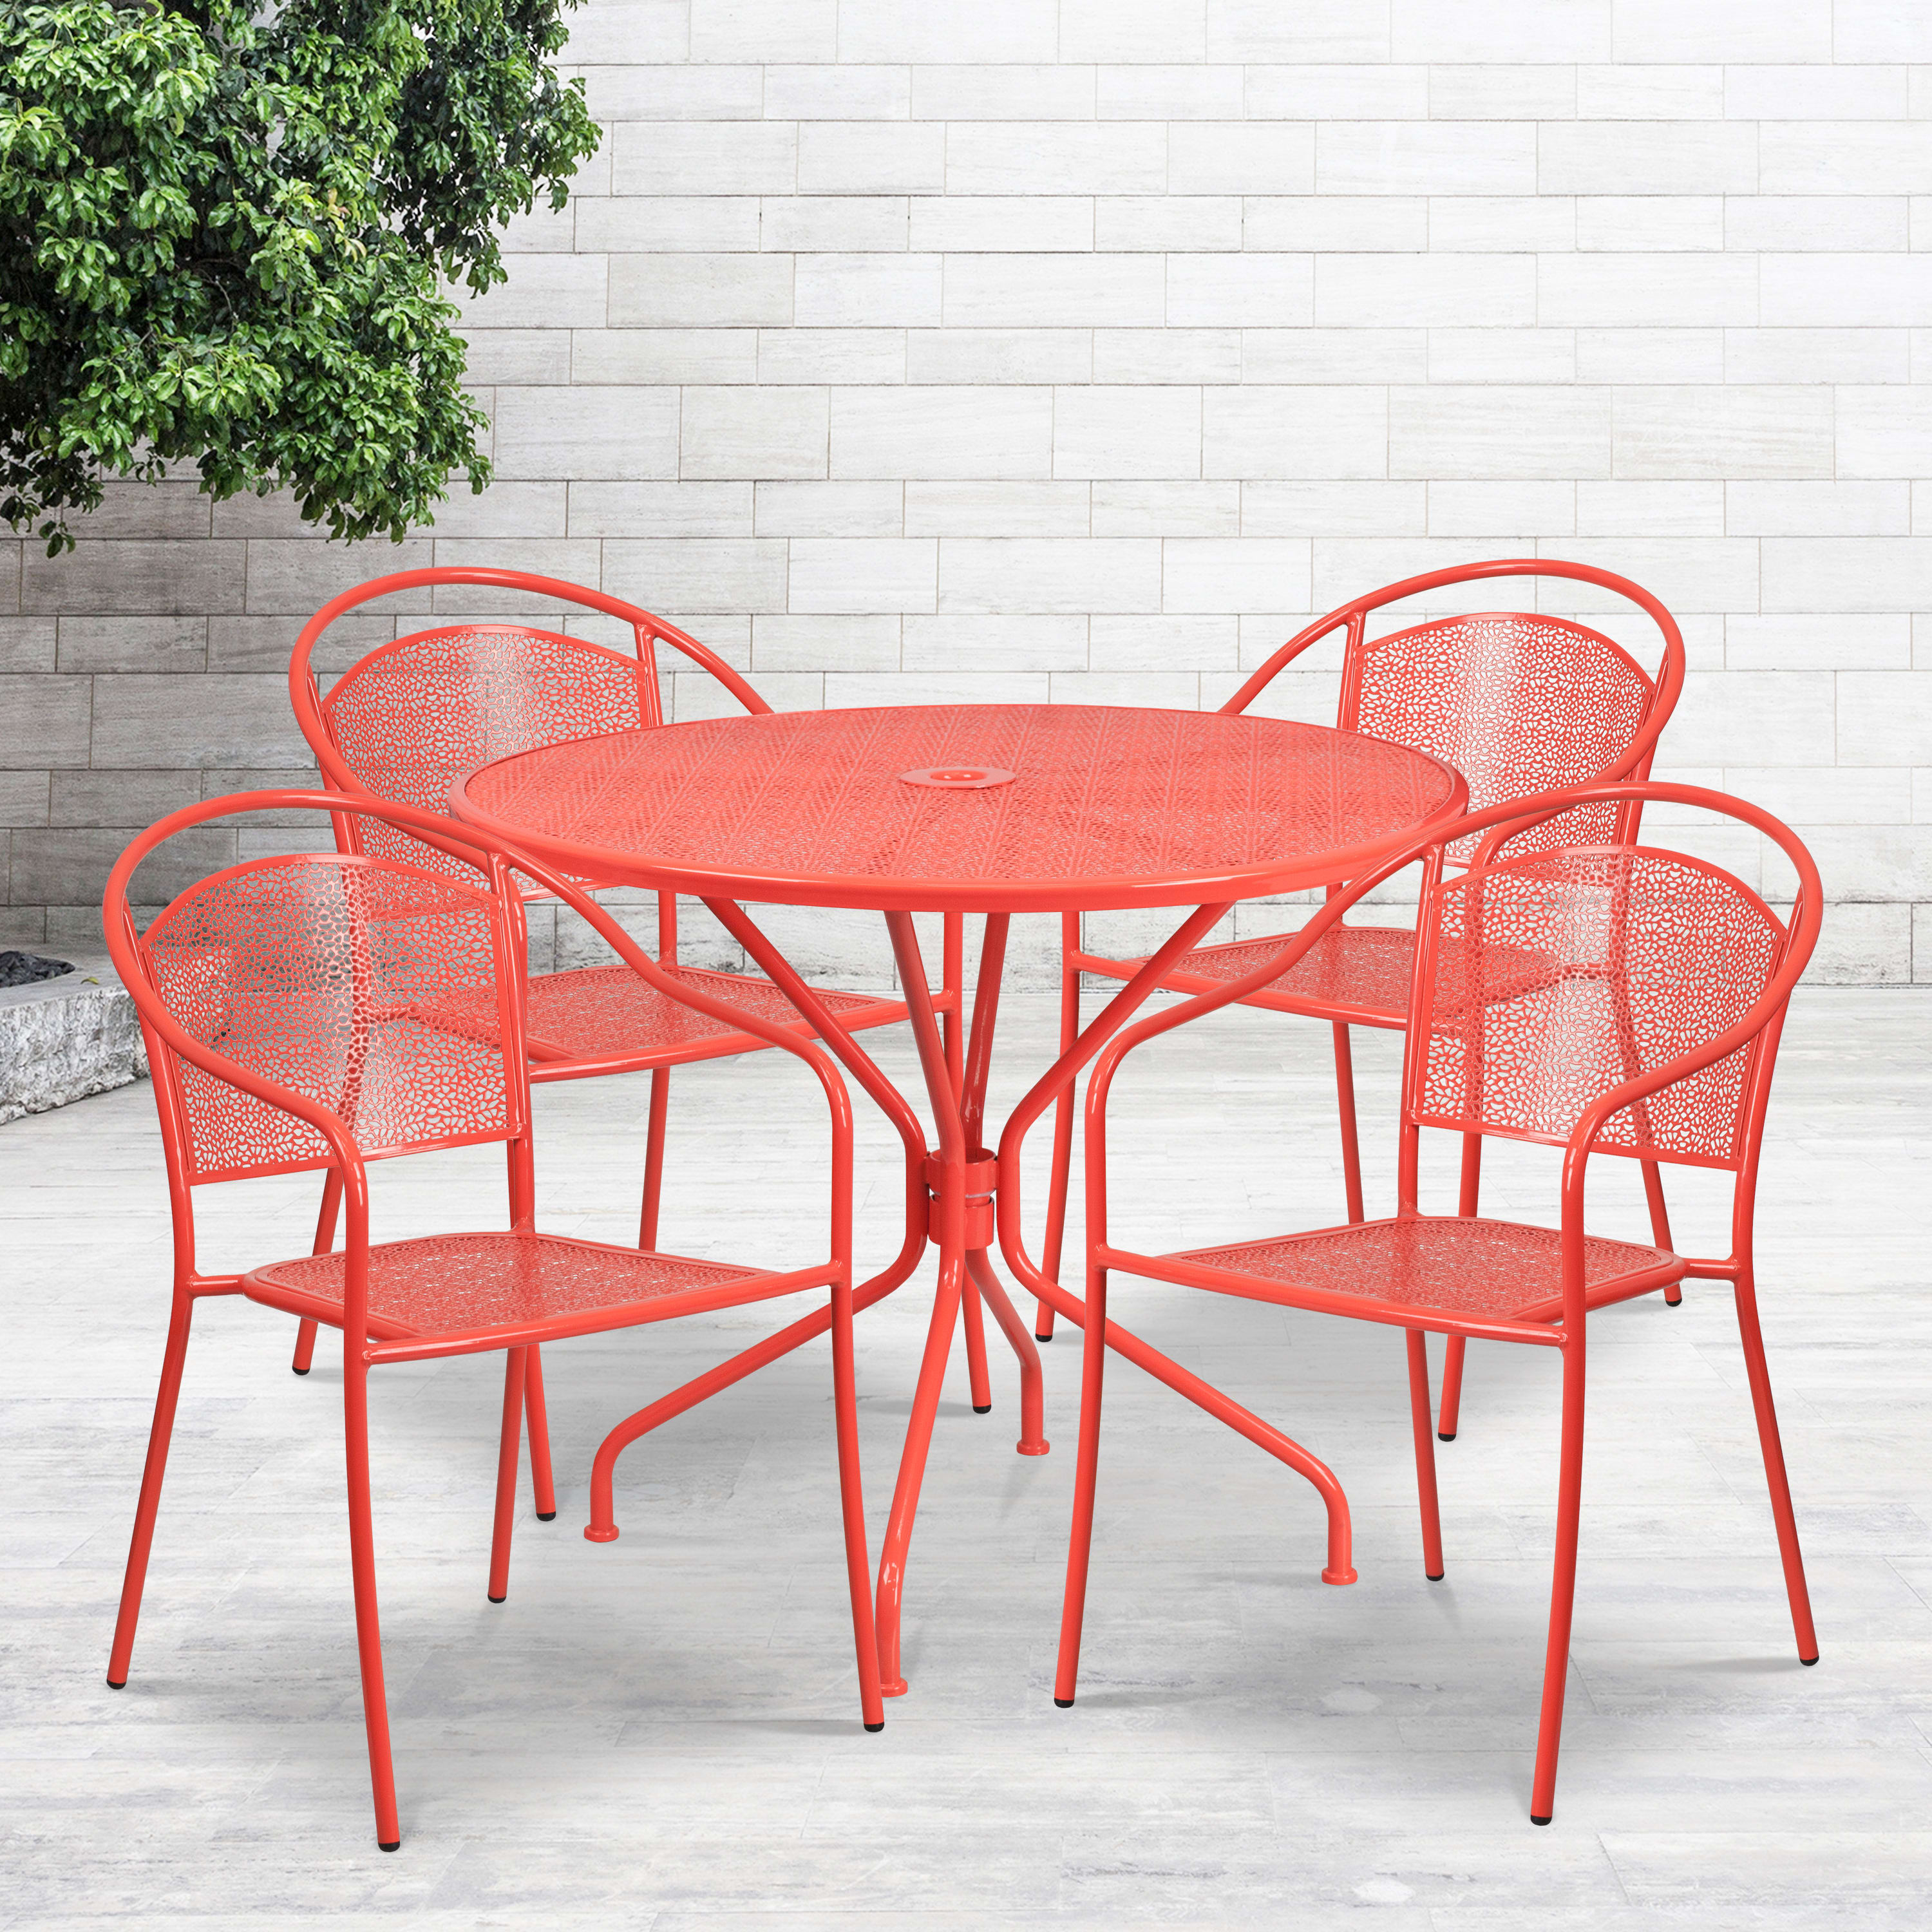 Flash Furniture Commercial Grade 35.25" Round Coral Indoor-Outdoor Steel Patio Table Set with 4 Round Back Chairs - image 1 of 5